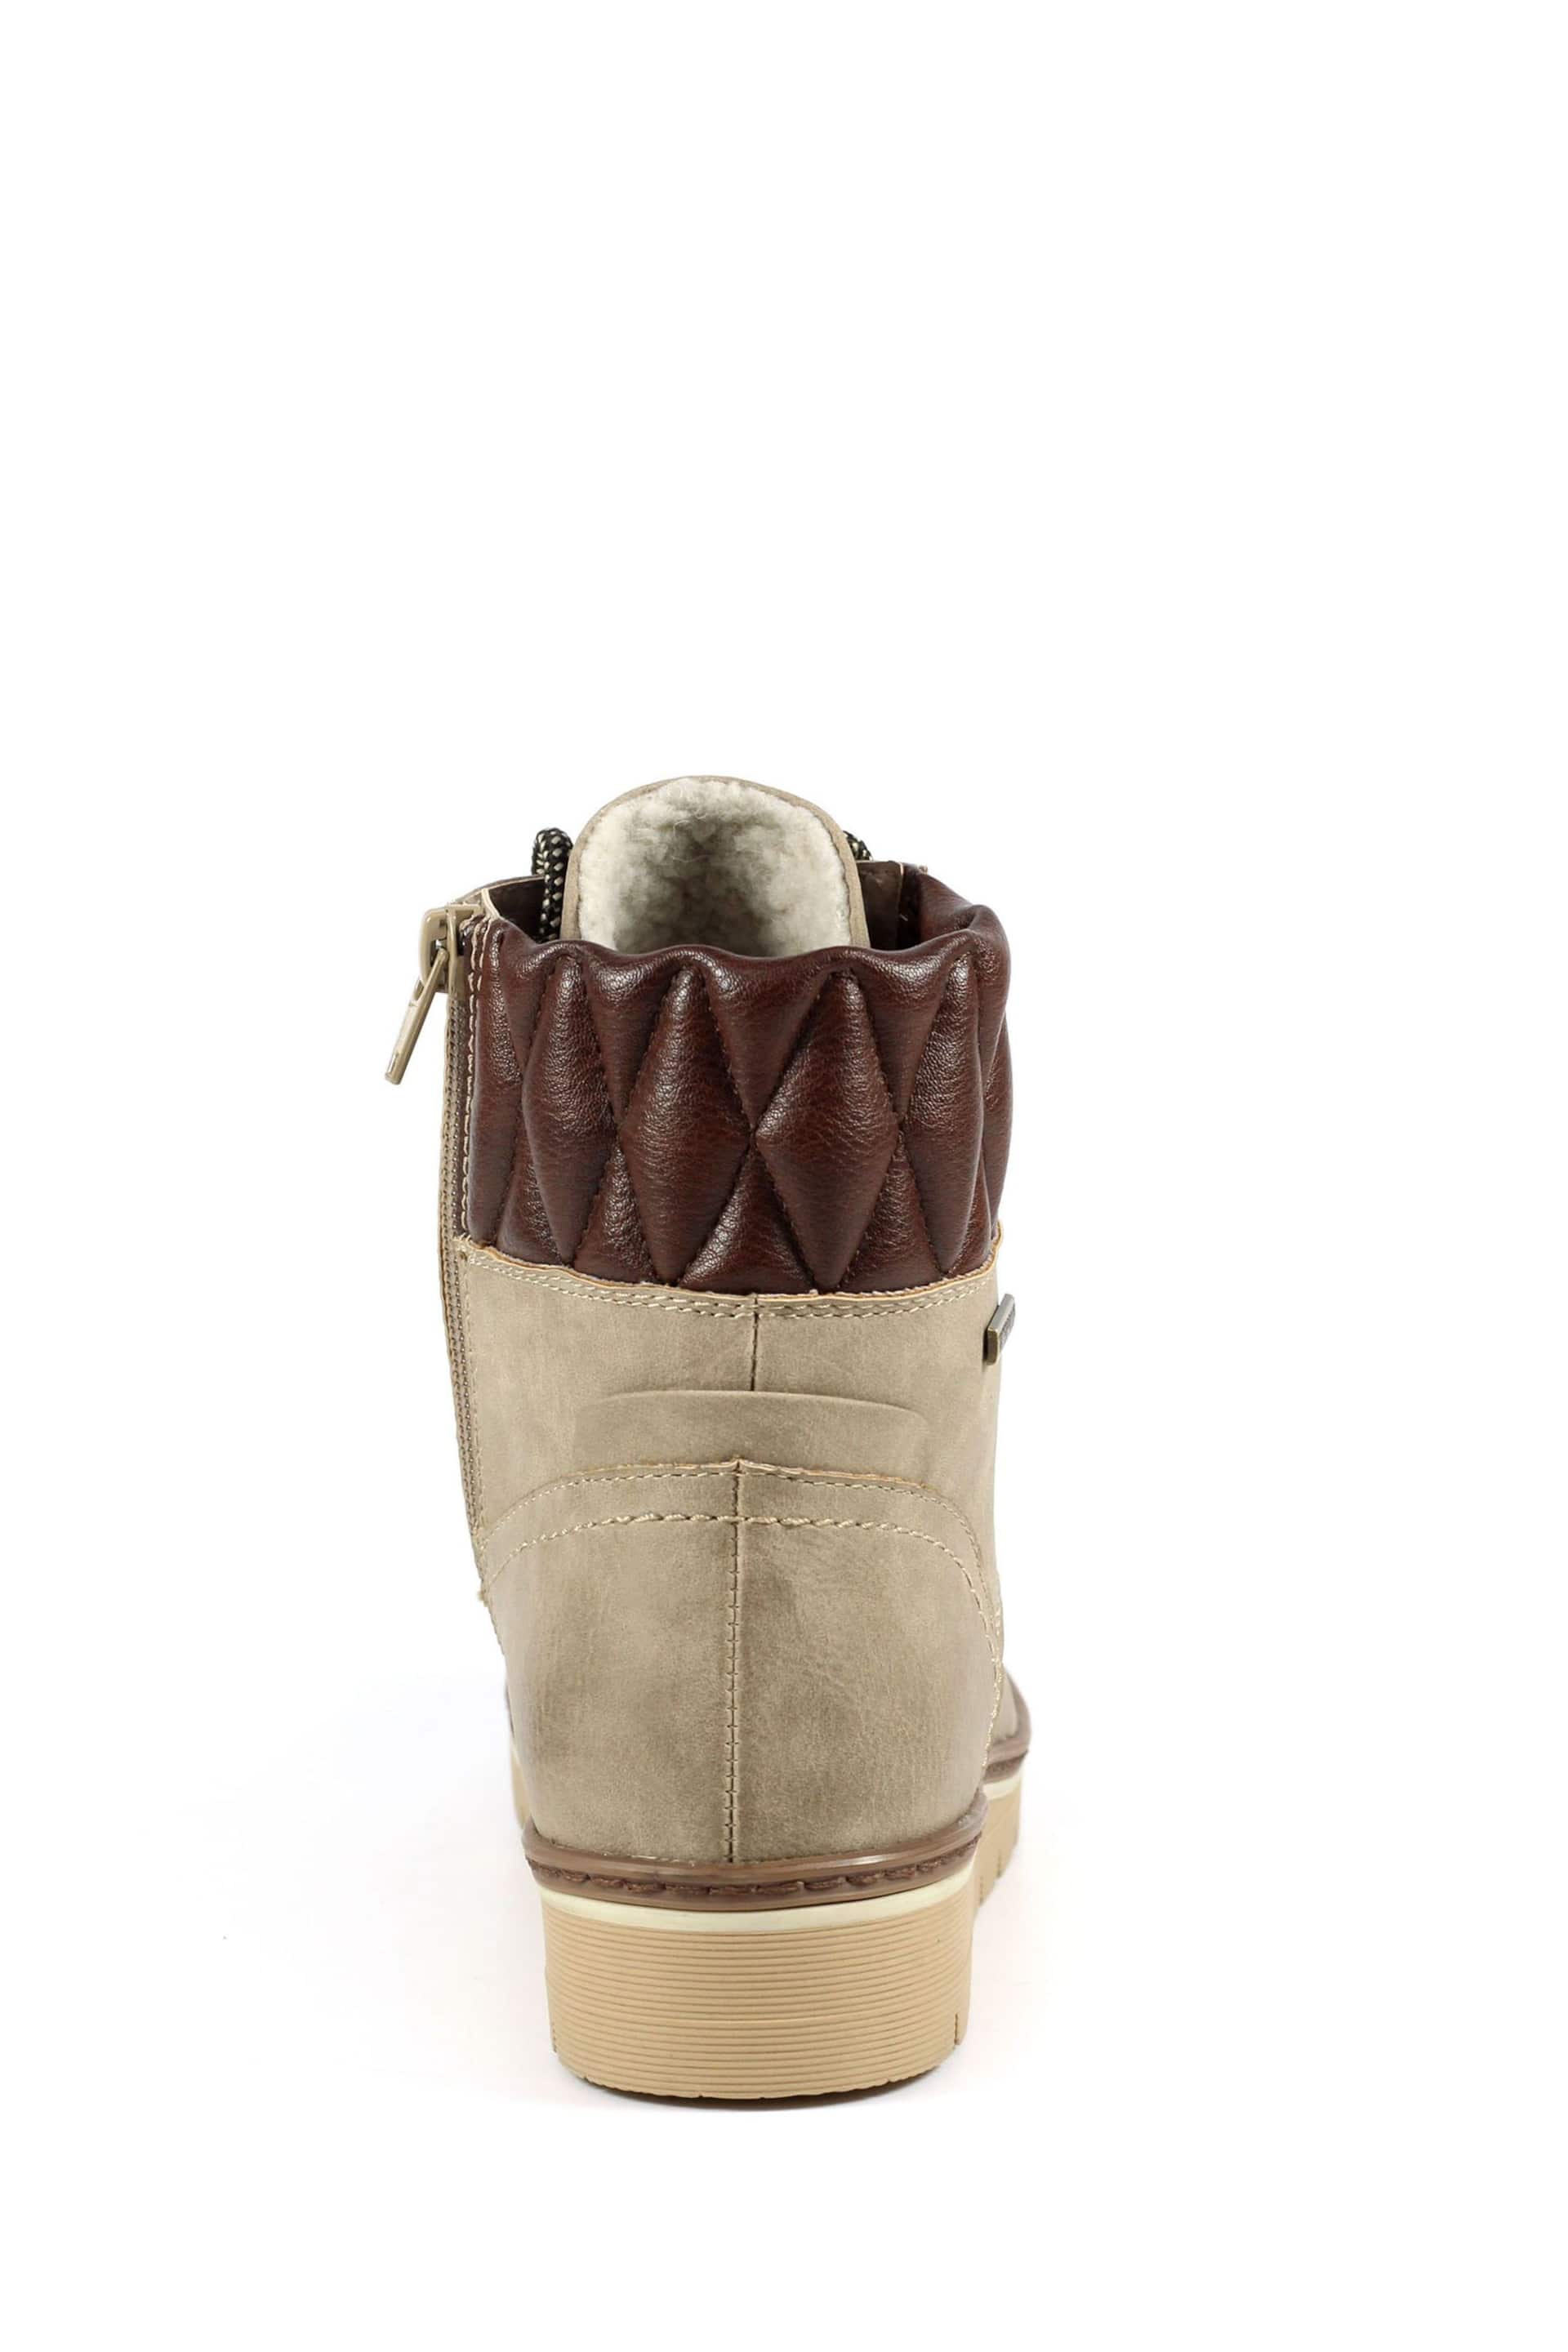 Lunar Natural Roberta Stone Waterproof Ankle Boots - Image 7 of 8